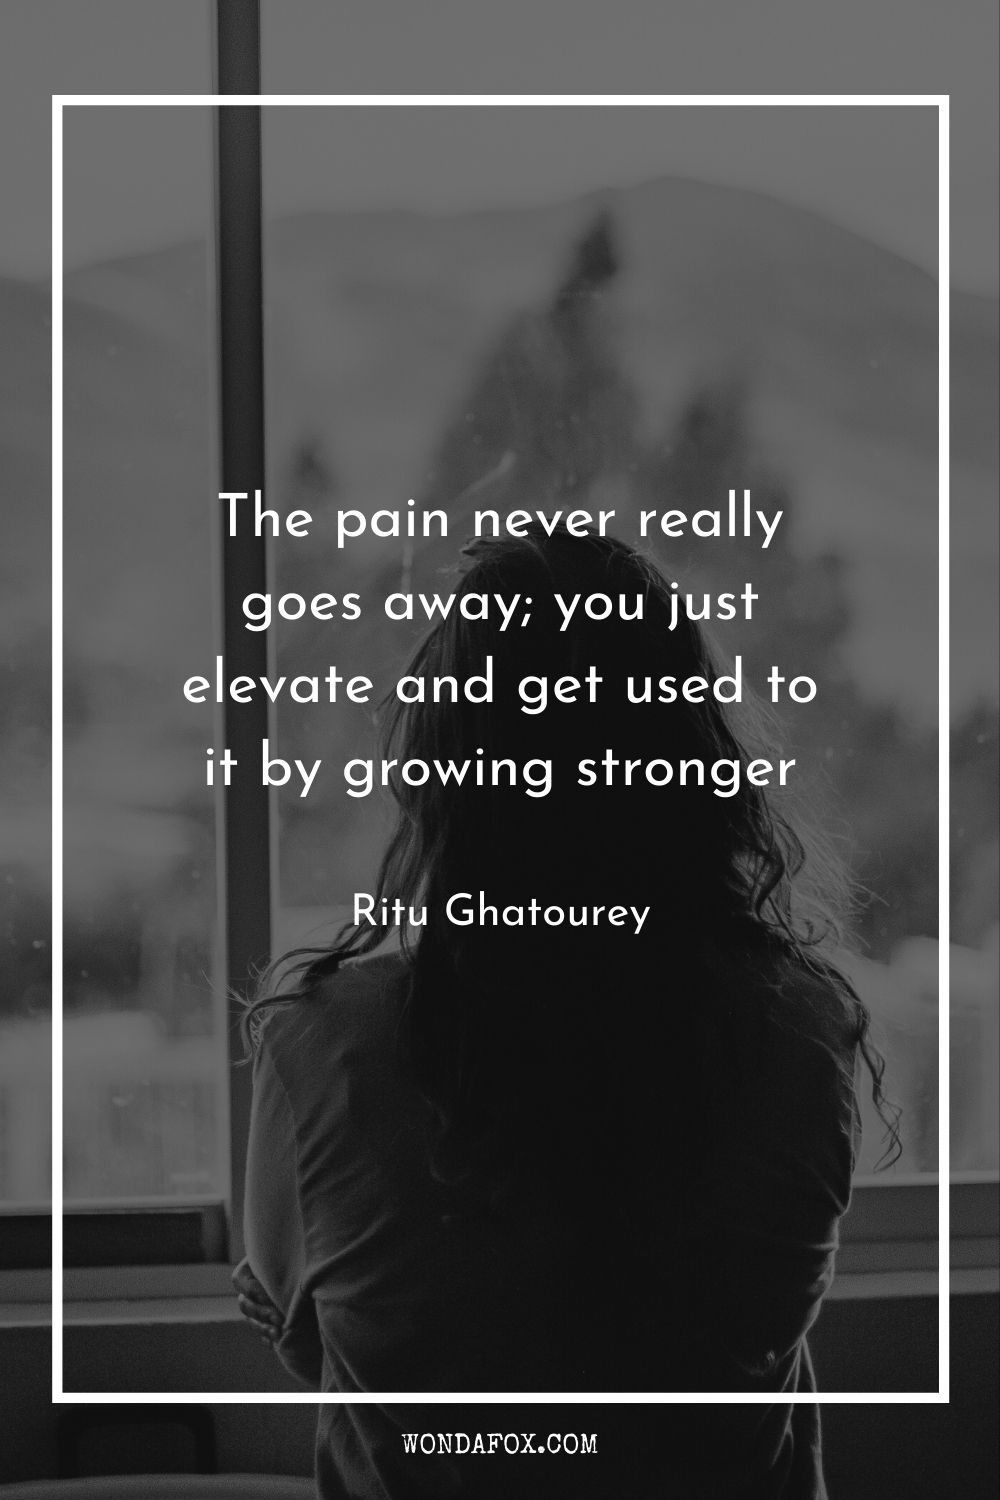 The pain never really goes away; you just elevate and get used to it by growing stronger